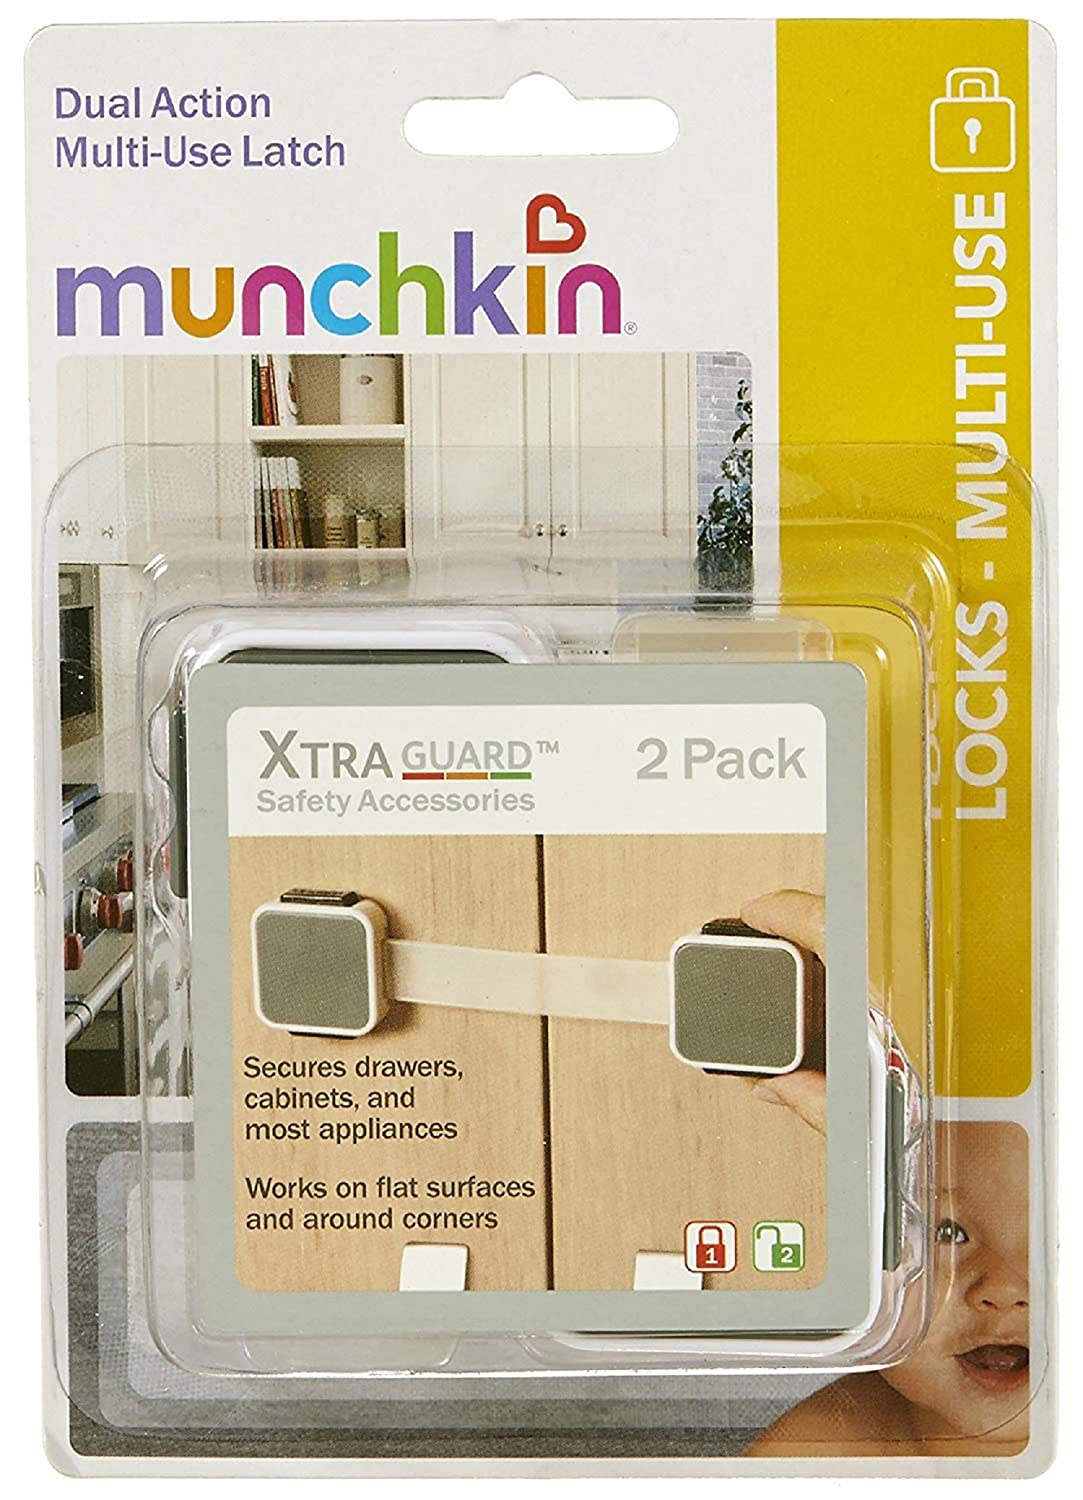 Munchkin XTRAGUARD 2 Count Dual Action Multi Use Latches, Pack of 4 (8 Count)